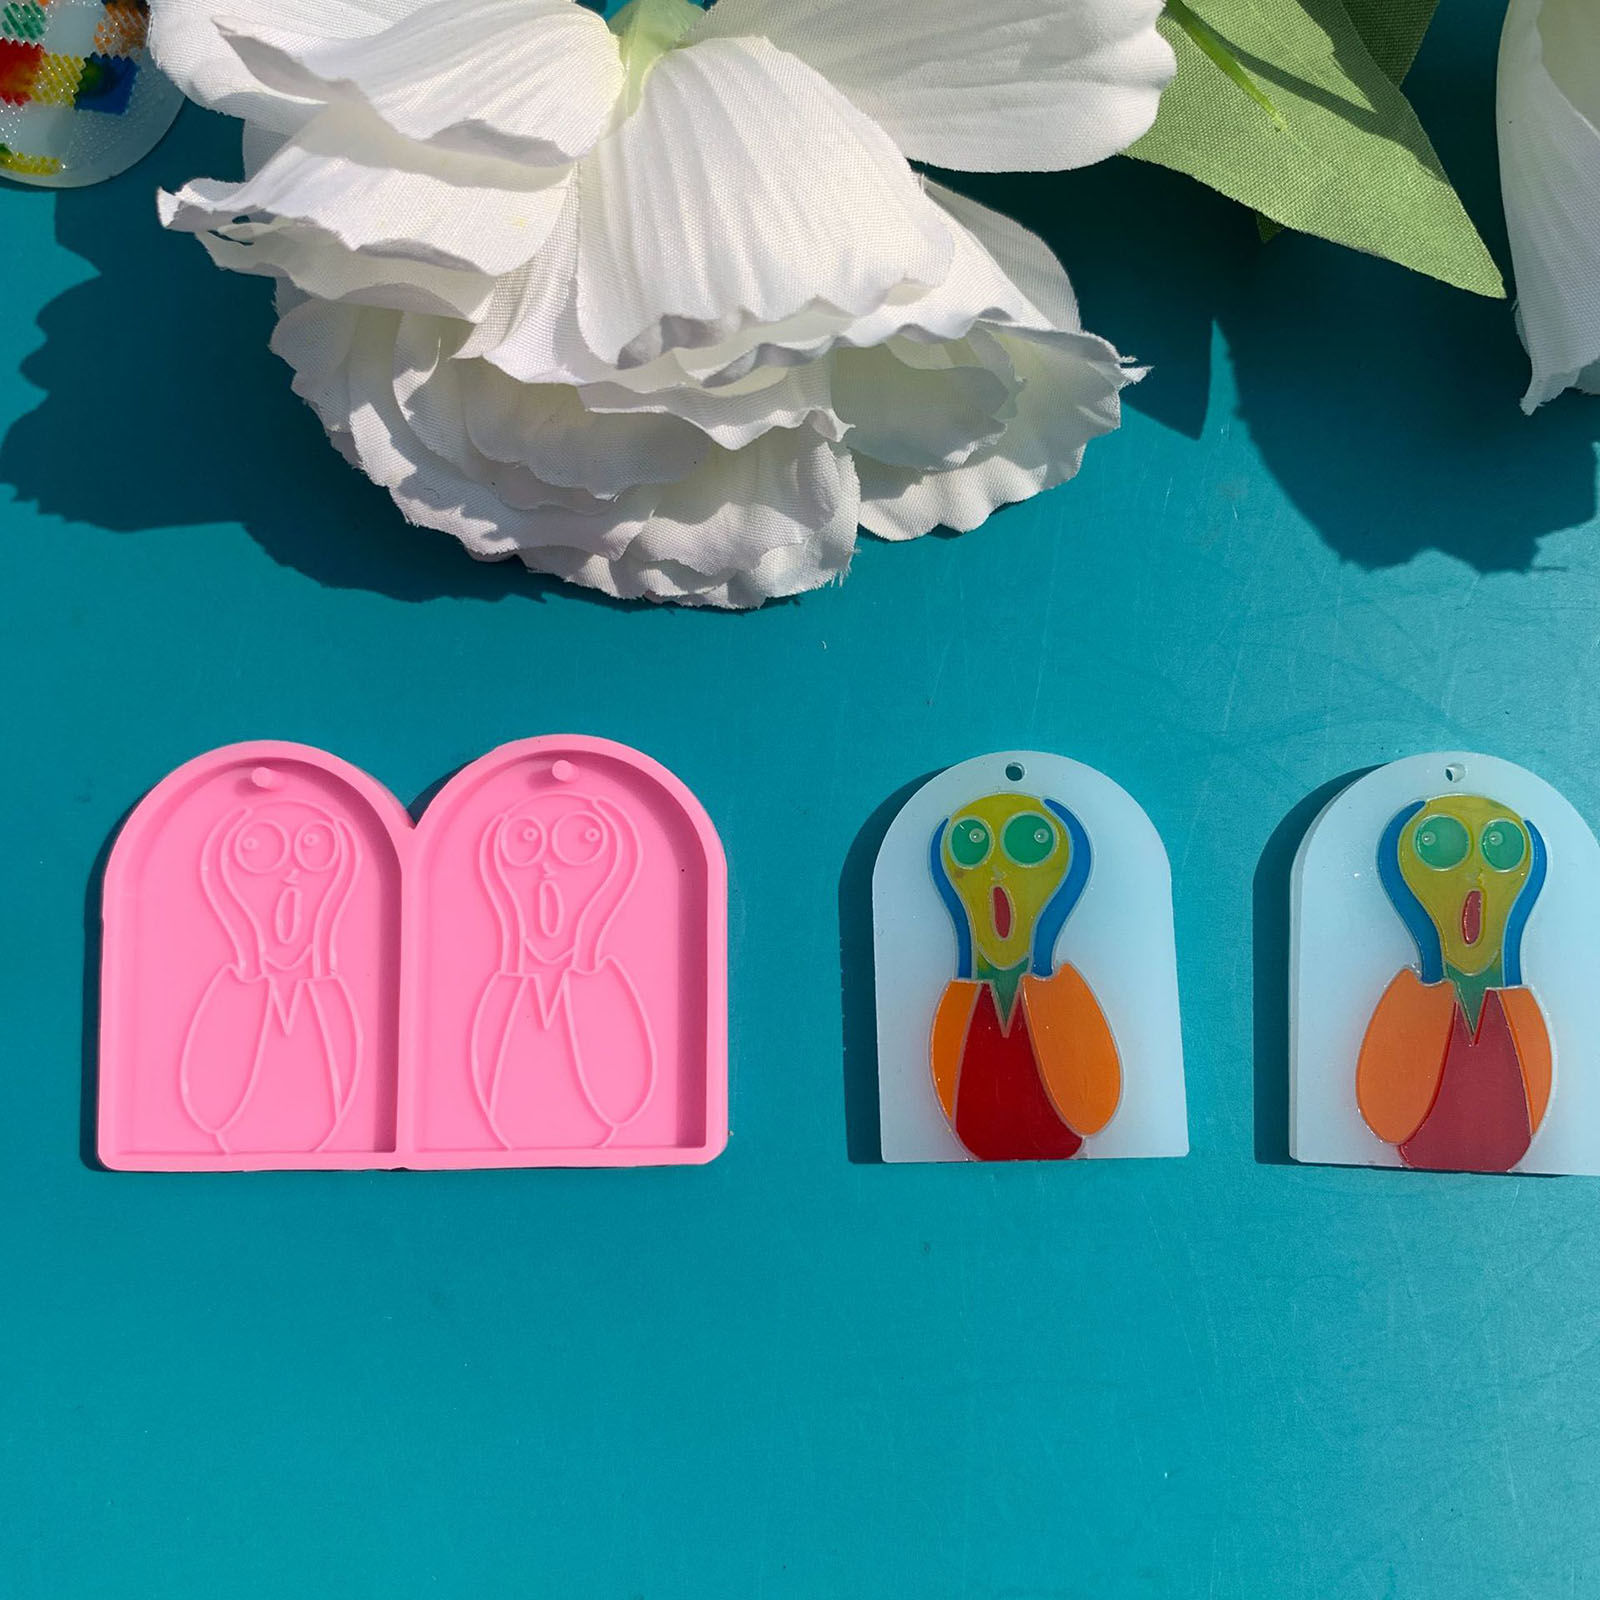 Picture of Silicone Resin Mold For Jewelry Making Pendant Earrings Arched Head Portrait Pink 6.3cm x 4.5cm, 1 Piece